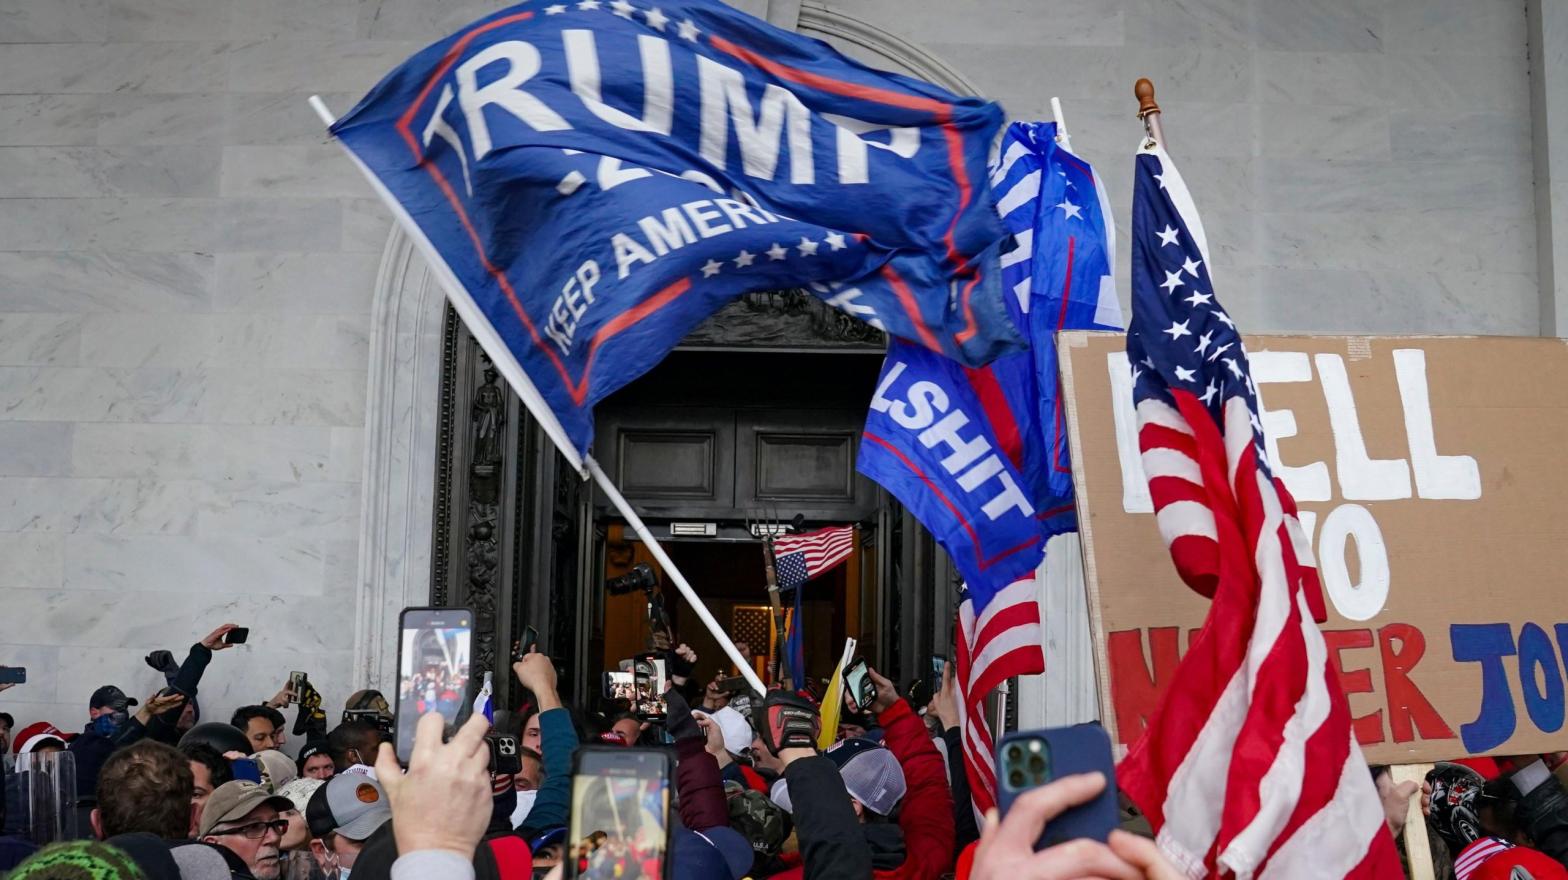 Far-right rioters who organised on social media breaking into the U.S. Capitol on Jan. 6, 2021; used here as stock photo. (Photo: John Minchillo, Getty Images)